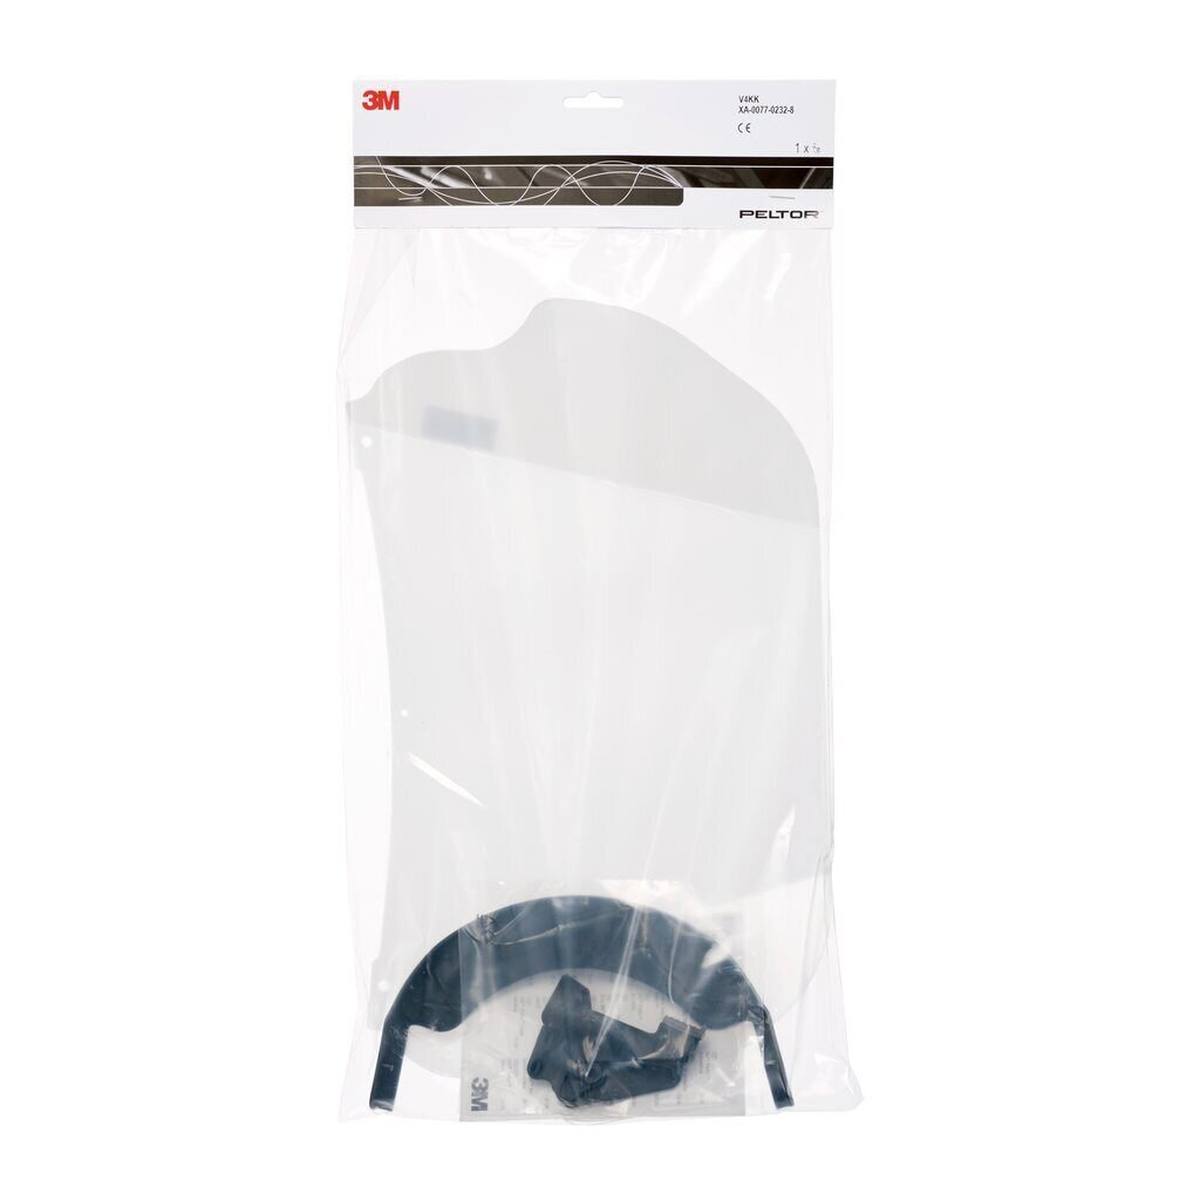 3M V4KK clear visor polycarbonate with sun shield short extremely impact and scratch resistant Thickness: 1.5 mm, weight: 180g (including helmet mount)